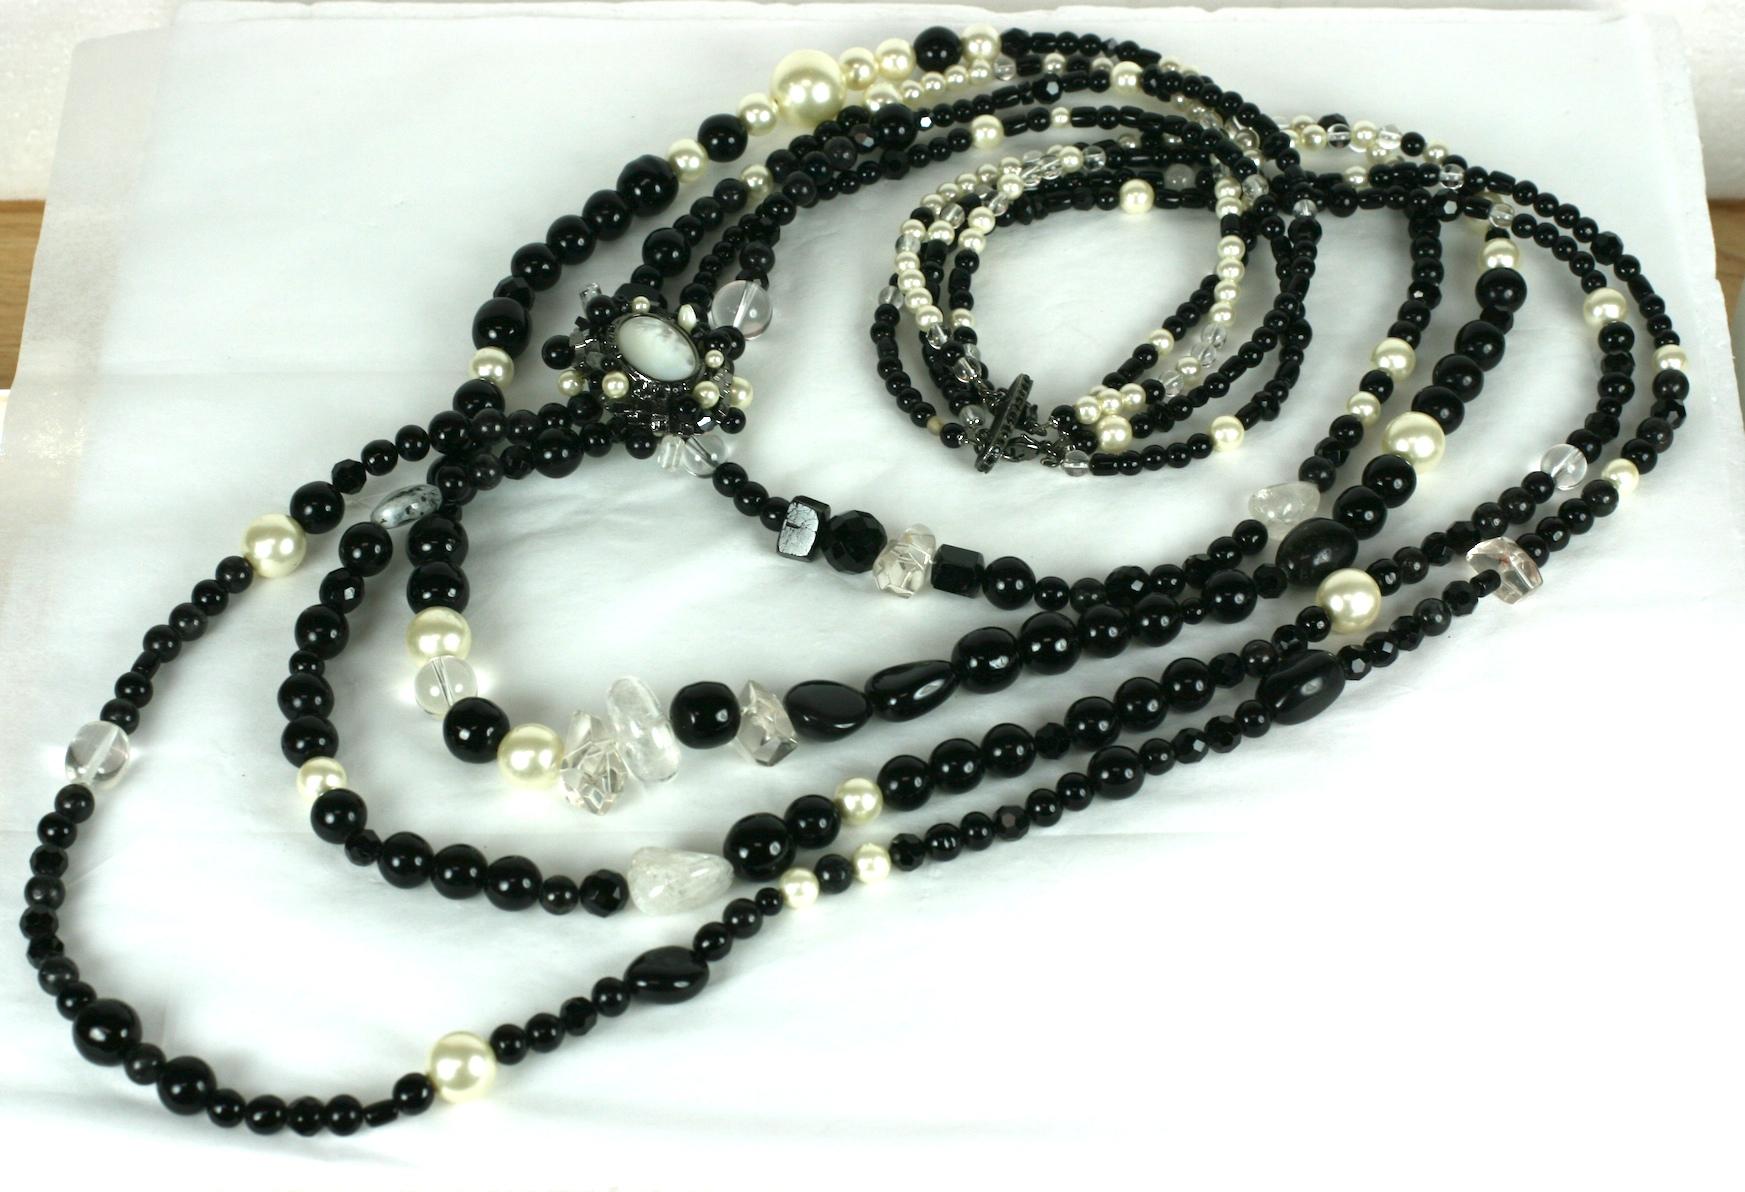 Massive Maison Goossens for Chanel Haute Couture Fall/Winter 2006 artisan inspired long multistrand semiprecious stone bead necklace. Composed of multi strands of jet, tumbled, faceted and polished rock crystal, unusual leopard quartz, hand made